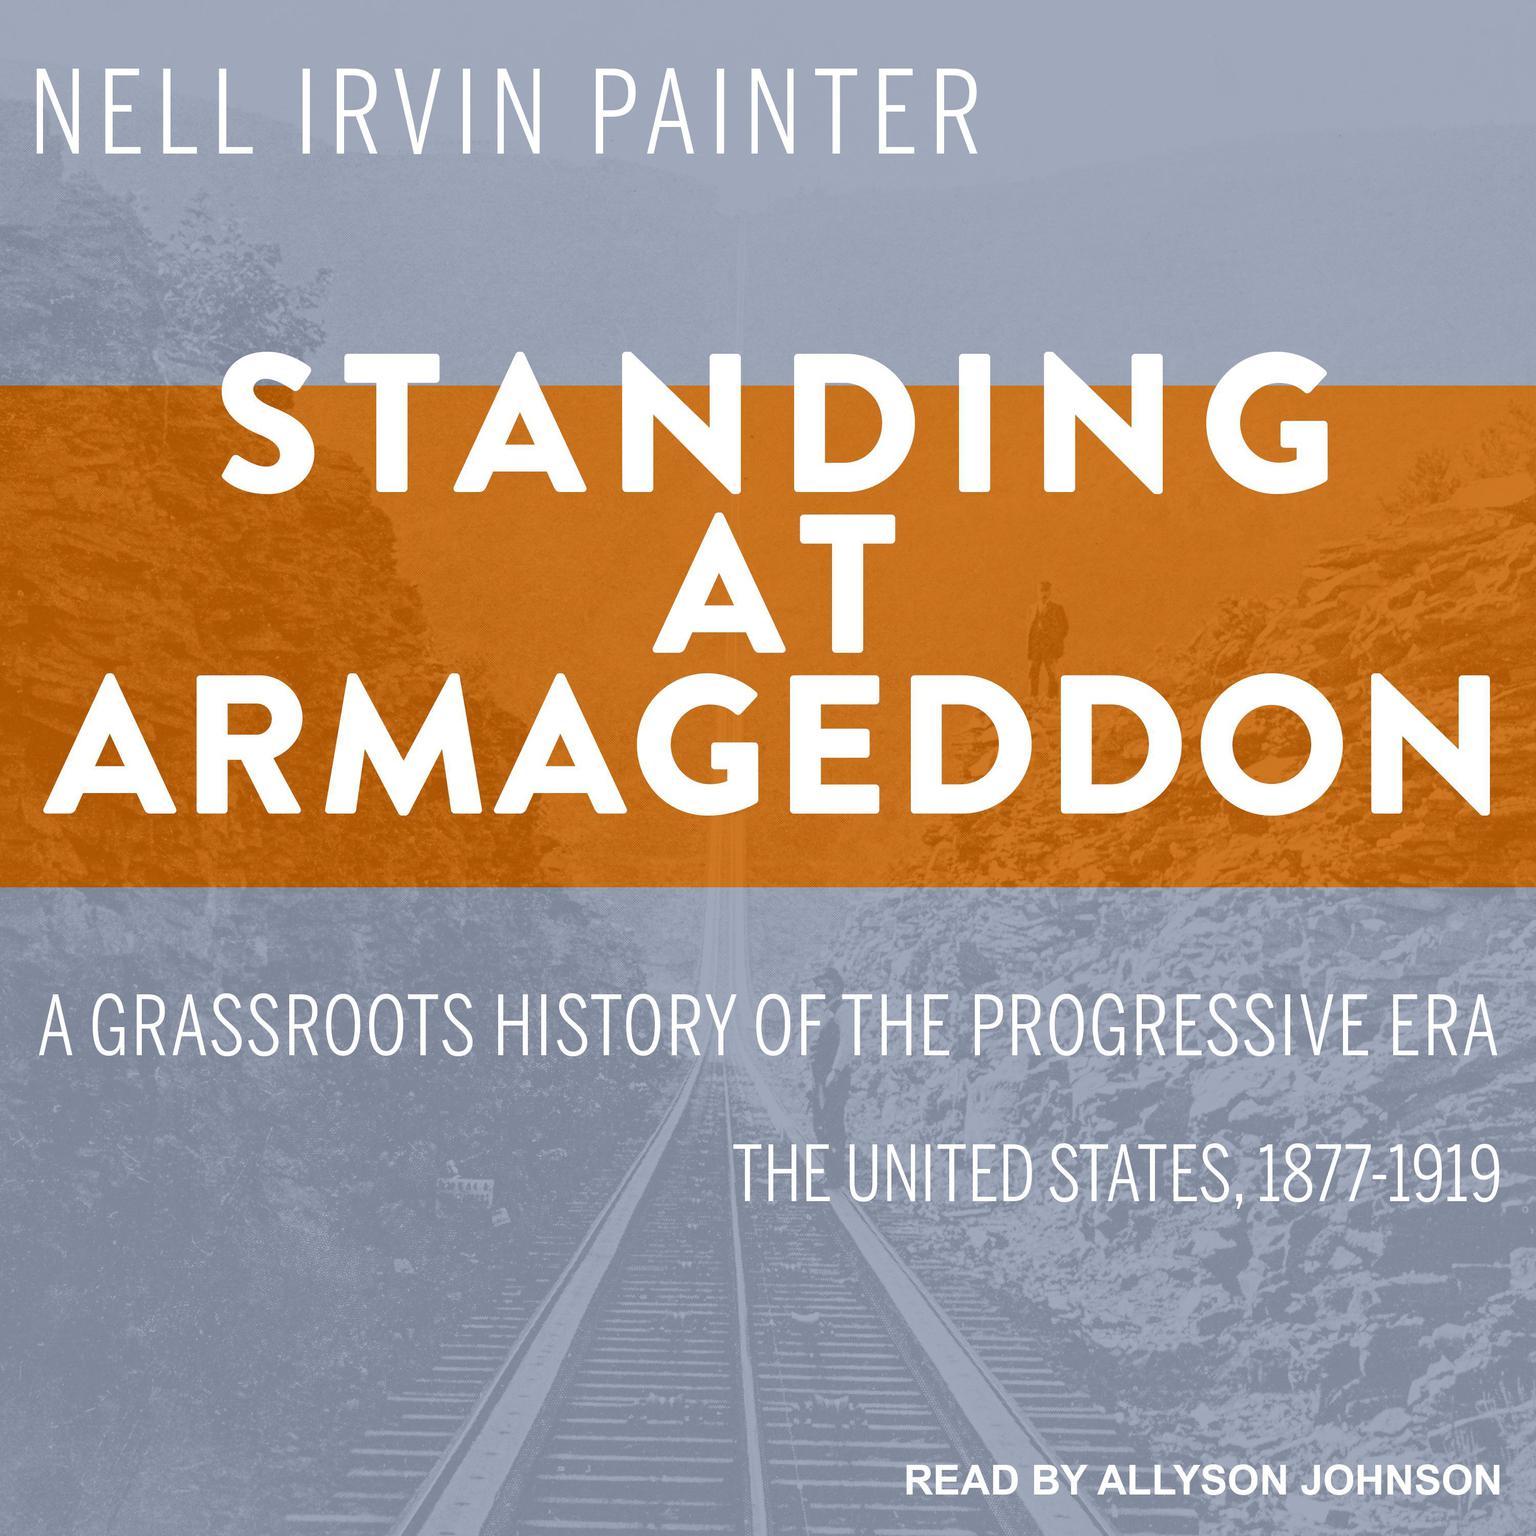 Standing at Armageddon: A Grassroots History of the Progressive Era Audiobook, by Nell Irvin Painter